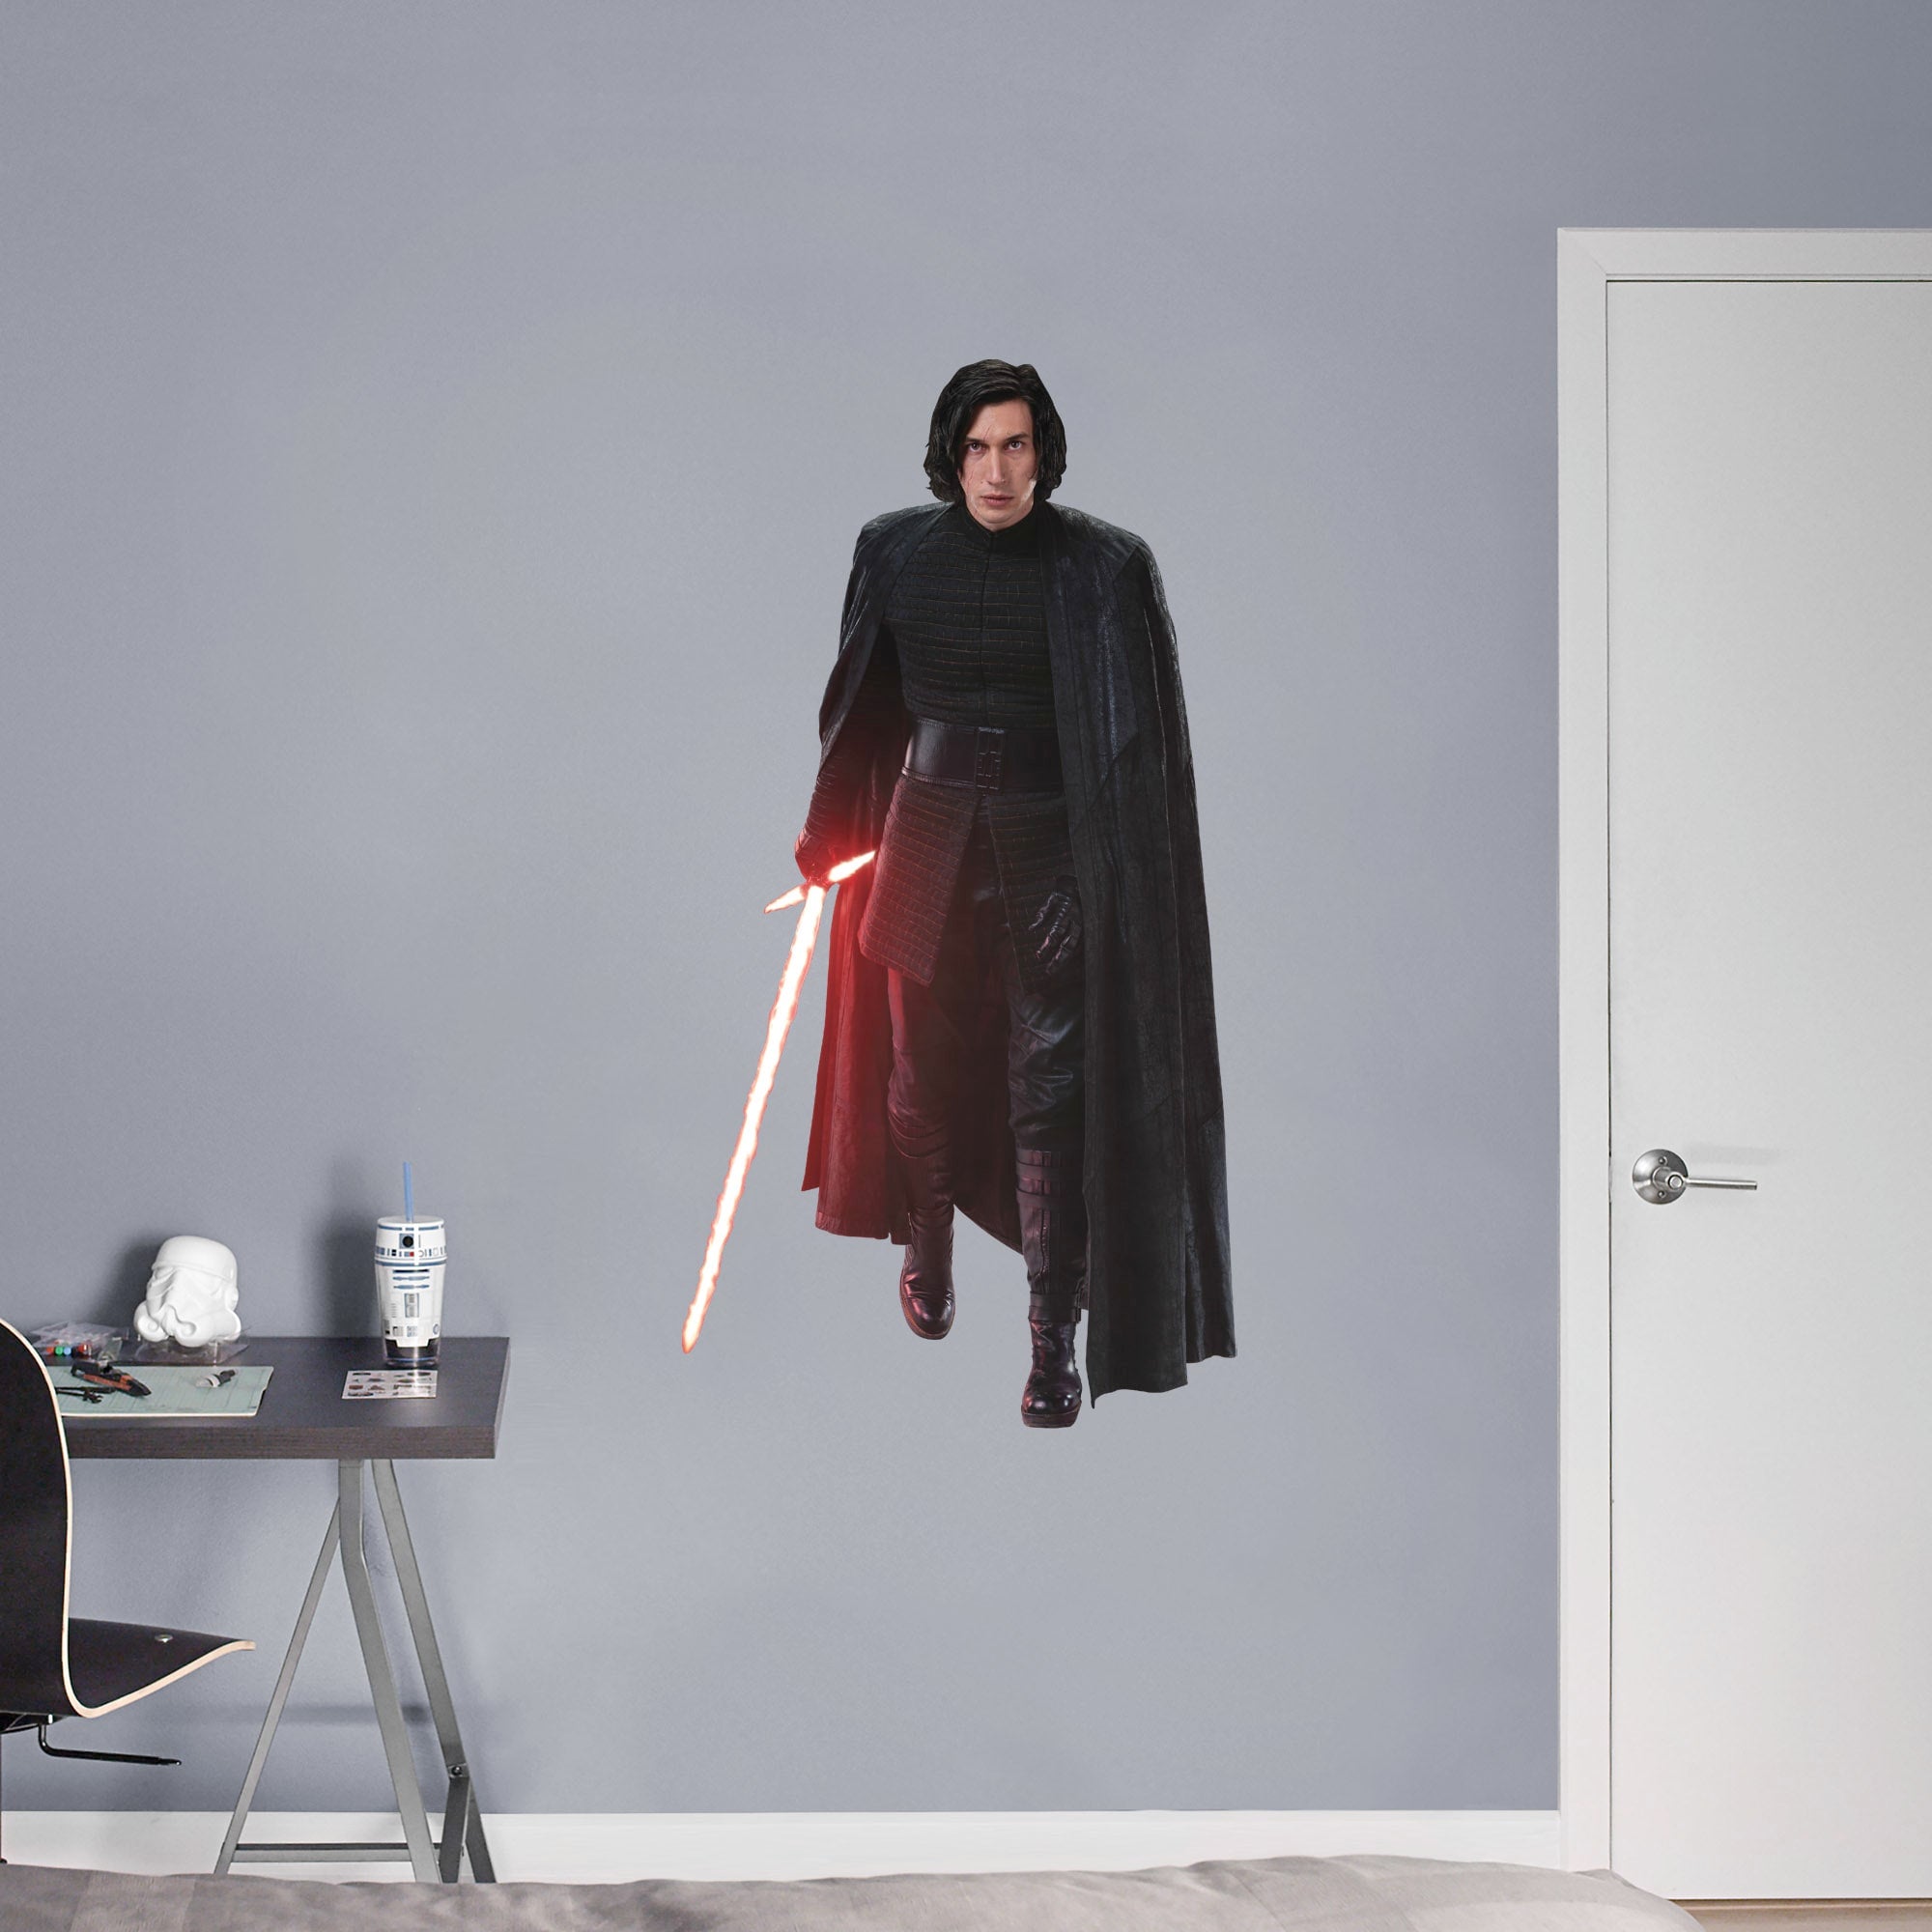 Kylo Ren: Unmasked - Officially Licensed Removable Wall Decal Giant Character + 2 Decals (26"W x 51"H) by Fathead | Vinyl